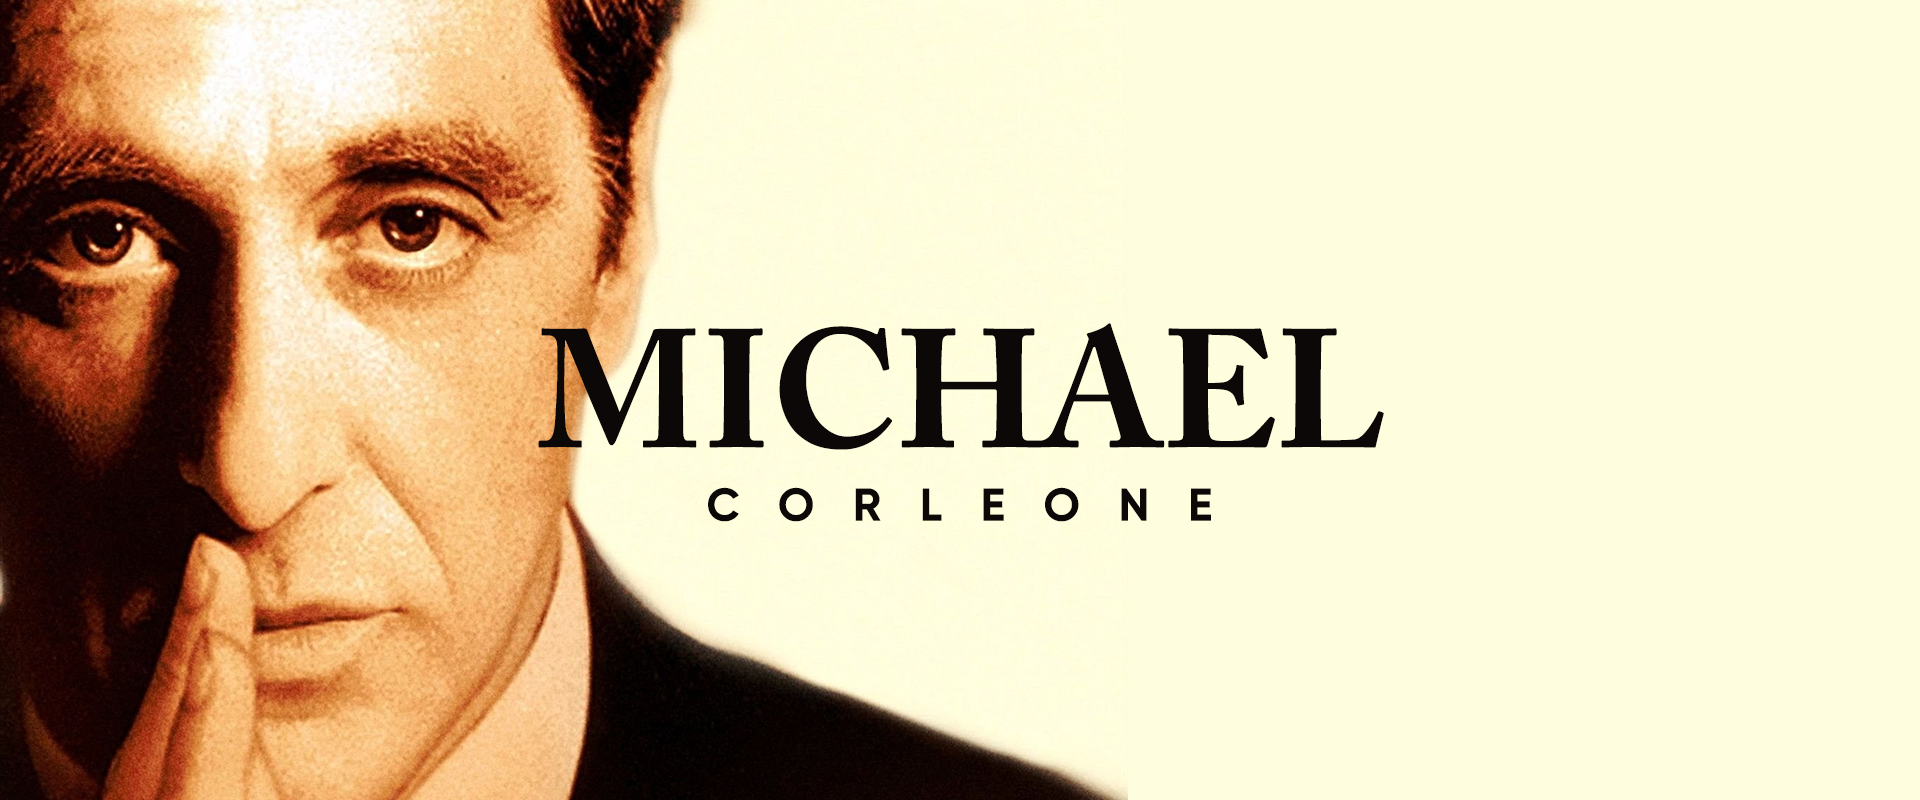 Michael Corleone-morally grey characters